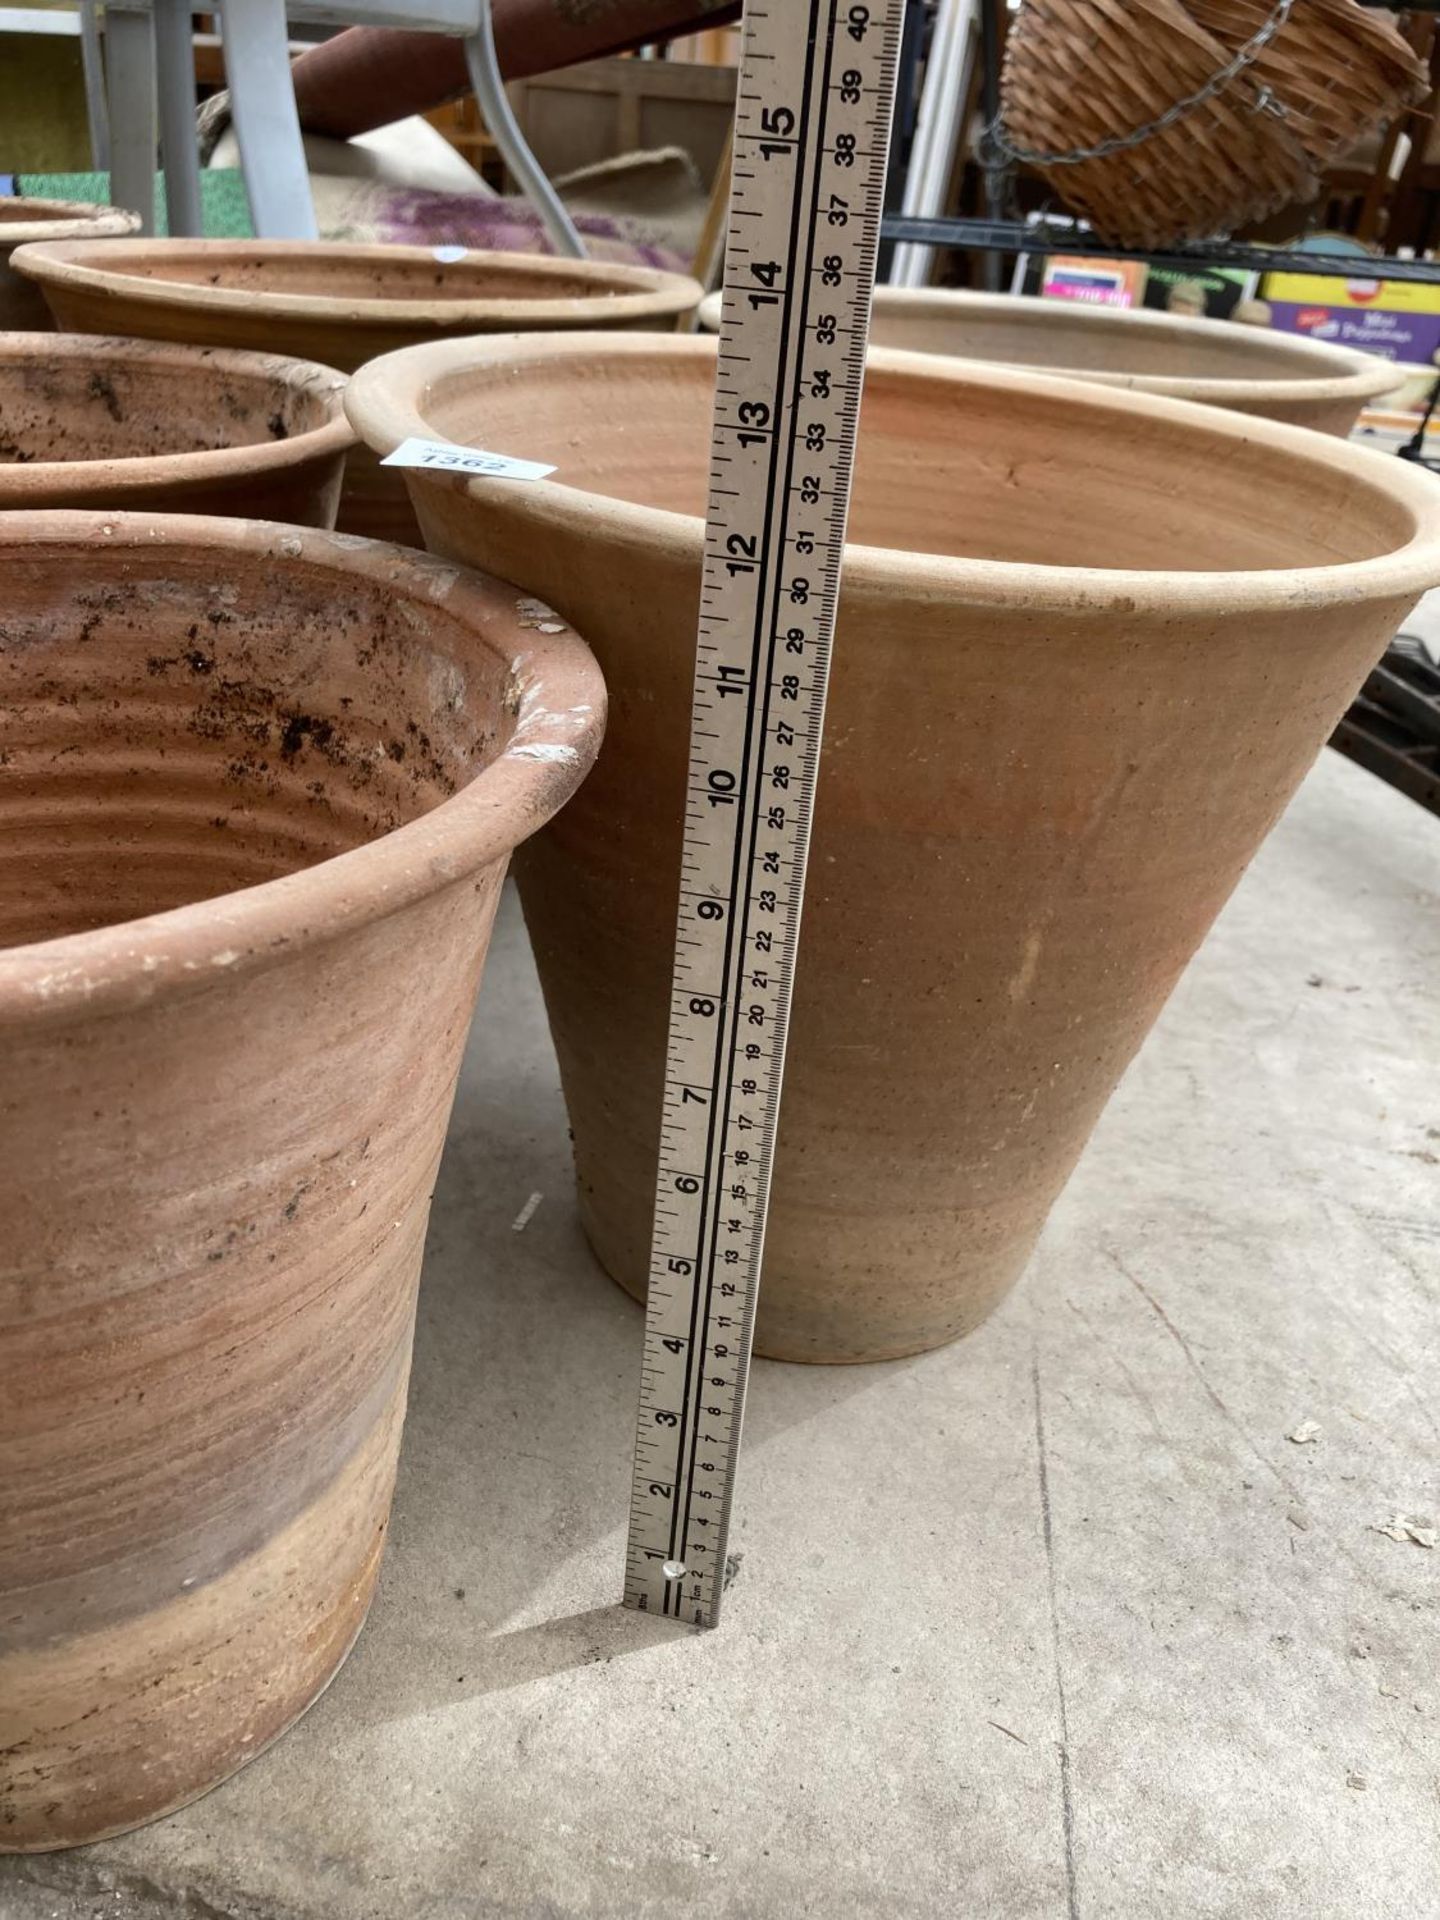 SEVEN LARGE TERRACOTTA PLANTERS TO INCLUDE A STRAWBERRY/HERB POT - Image 6 of 8